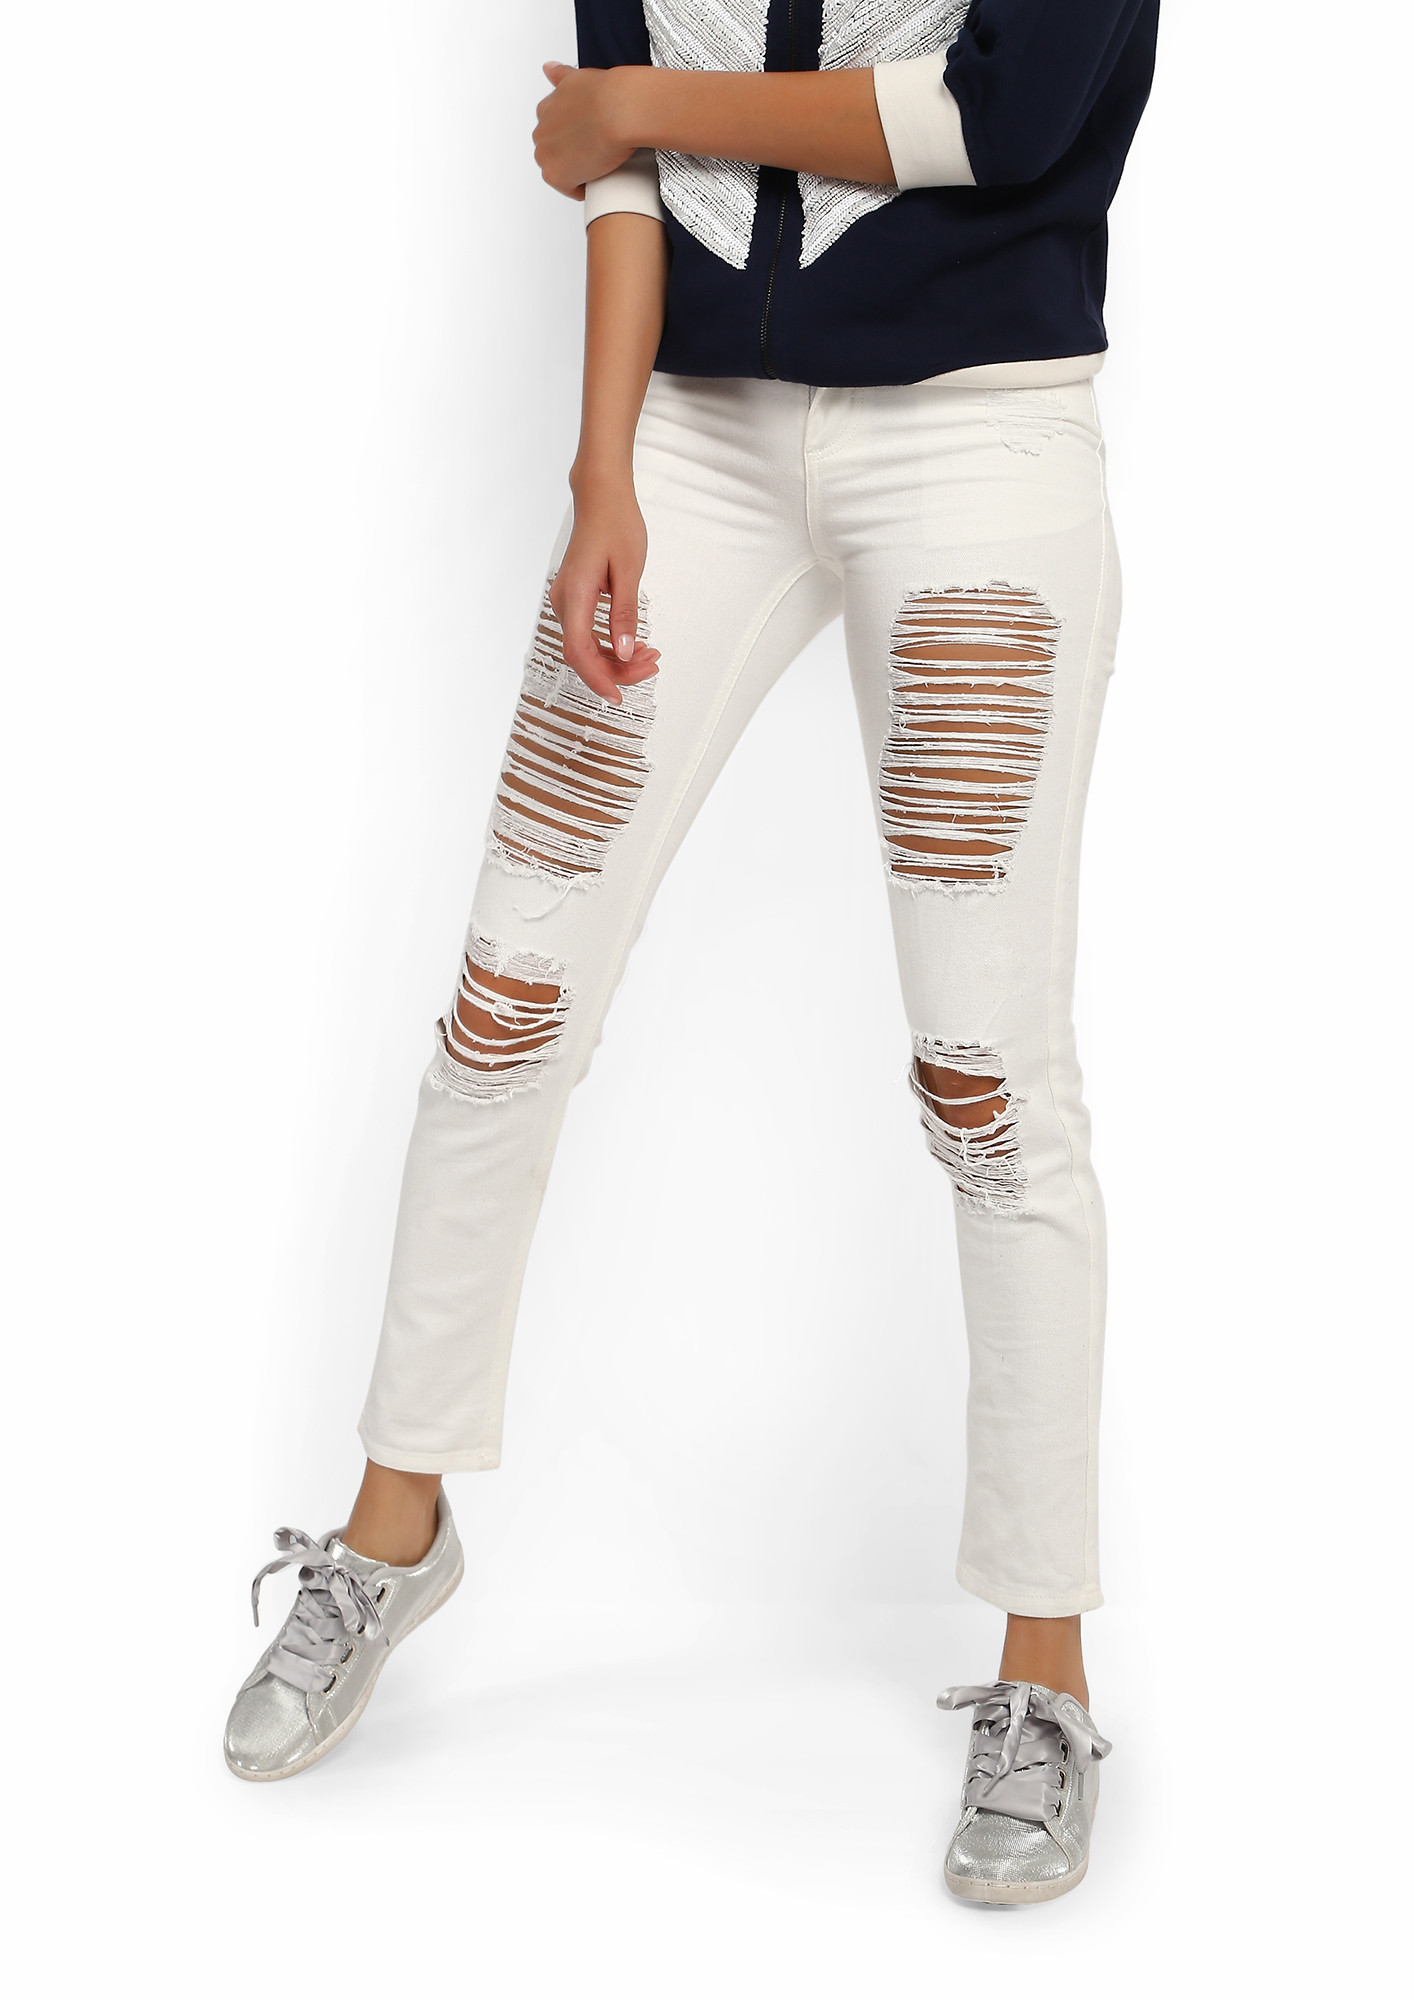 DAMSEL IN DISTRESSED WHITE JEANS